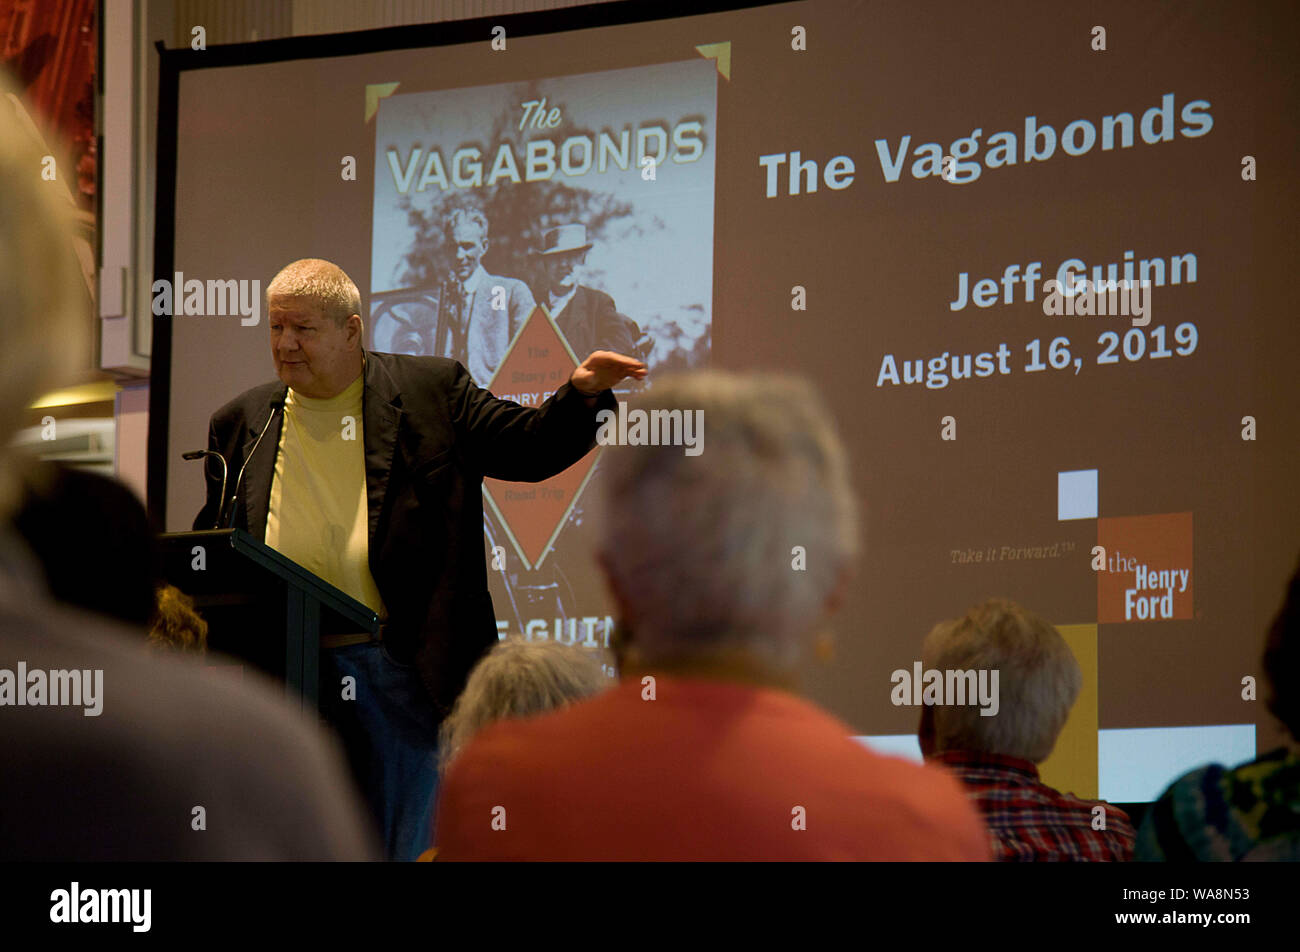 August 16, 2019, Detroit, Michigan, United States: Aug 16, 2019,  Dearborn, Michigan, United States;  Simon and Shuster author Jeff Guinn gives a program promoting his latest book :The Vagabonds'' who were the perod friends Thomas Edison, Henry Ford and Harvey Firestone who traveled together on road trips from 1914 to 1923. The Henry Ford Museum includes exhibits ranging from Transportation to History and Society and artifacts from the first Mustang Convertible to The bus that Rosa Parks rode to begin the civil rights movement to chair where President Lincoln was shot all located in Dearborn, Stock Photo